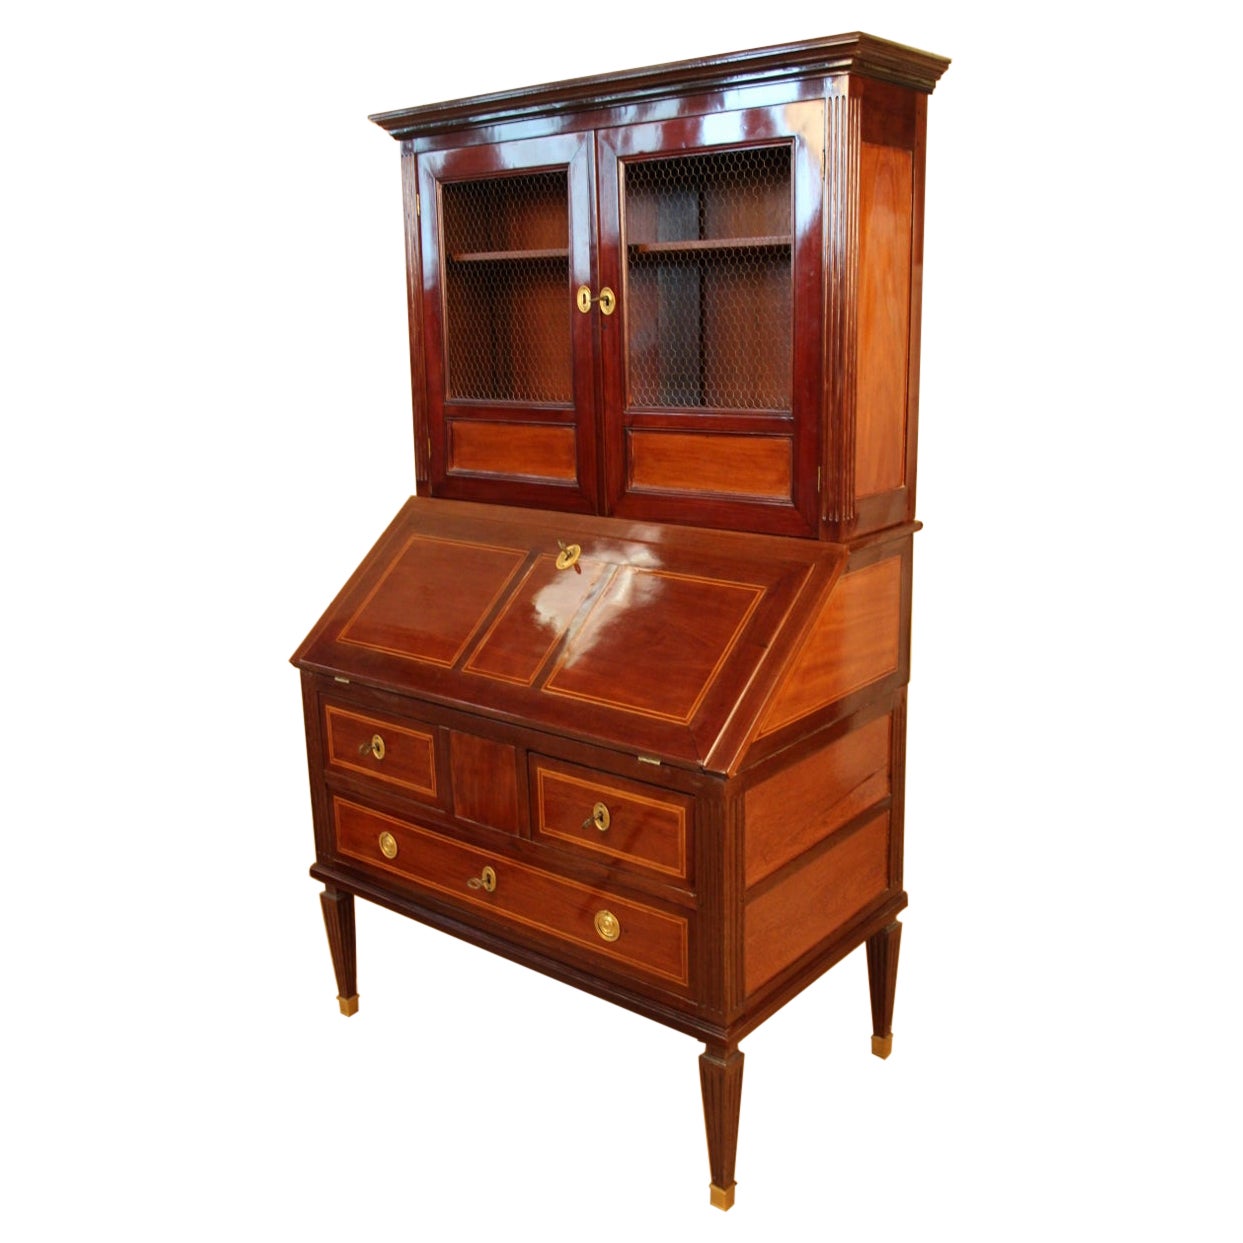 Scriban Bookcase In Solid Mahogany, 18th Century, Louis XVI, Port Furniture For Sale